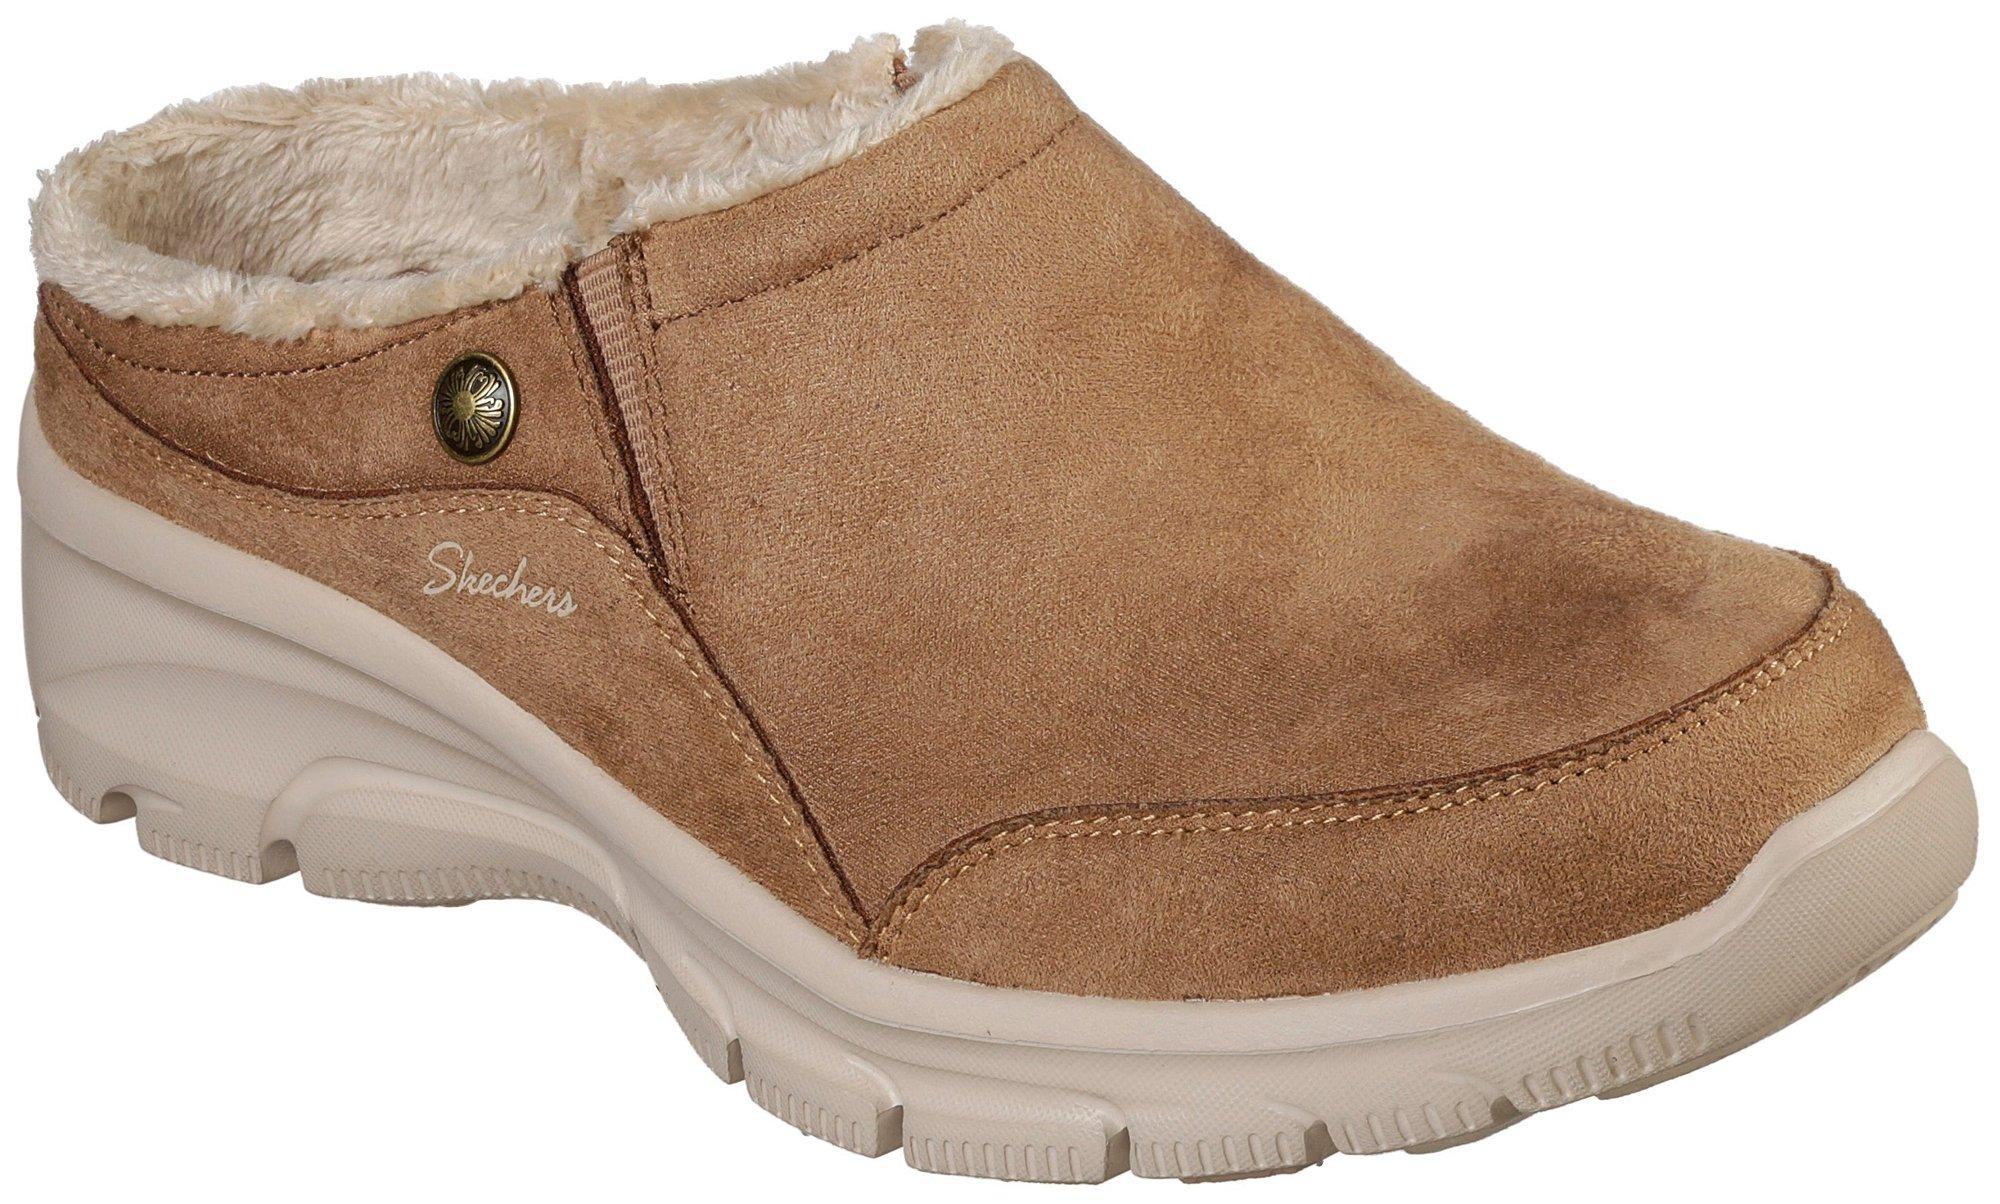 Skechers Womens Relaxed Fit Latte Clogs